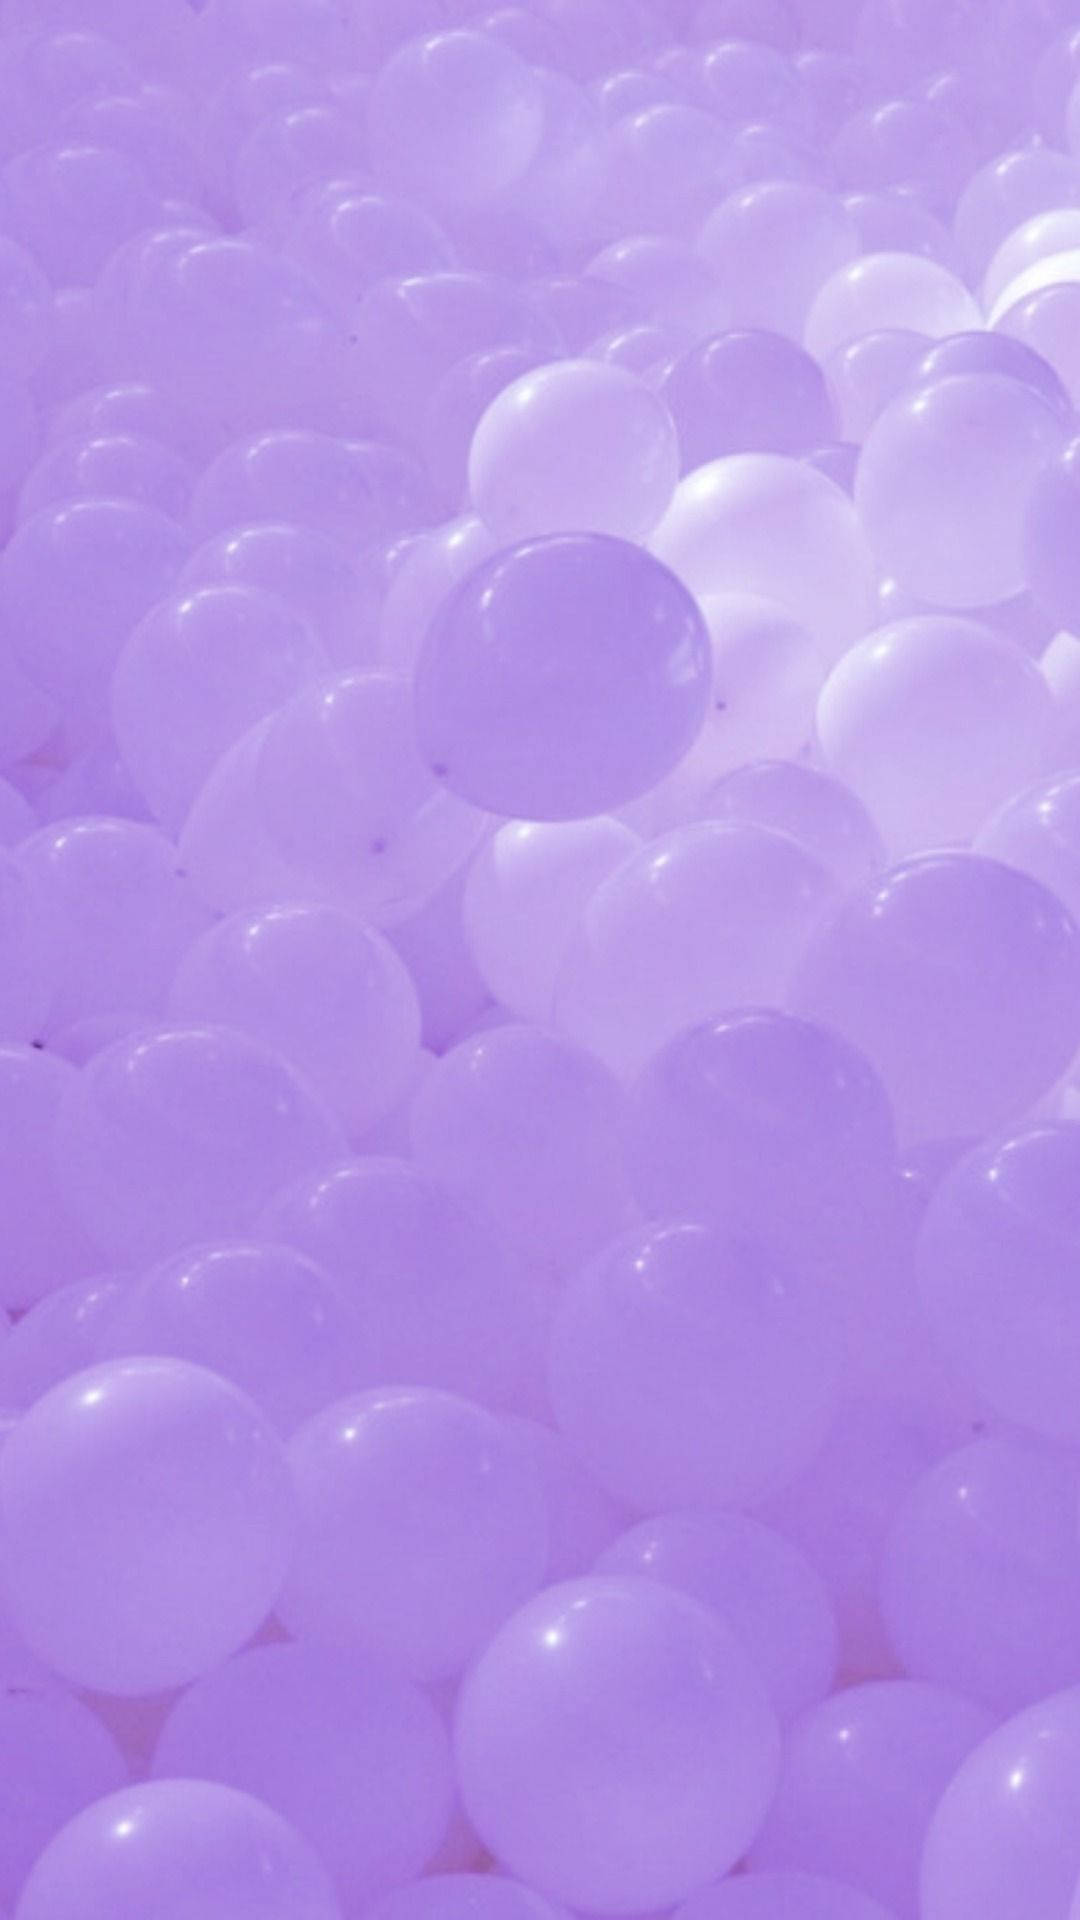 IPhone wallpaper with purple balloons - Pastel purple